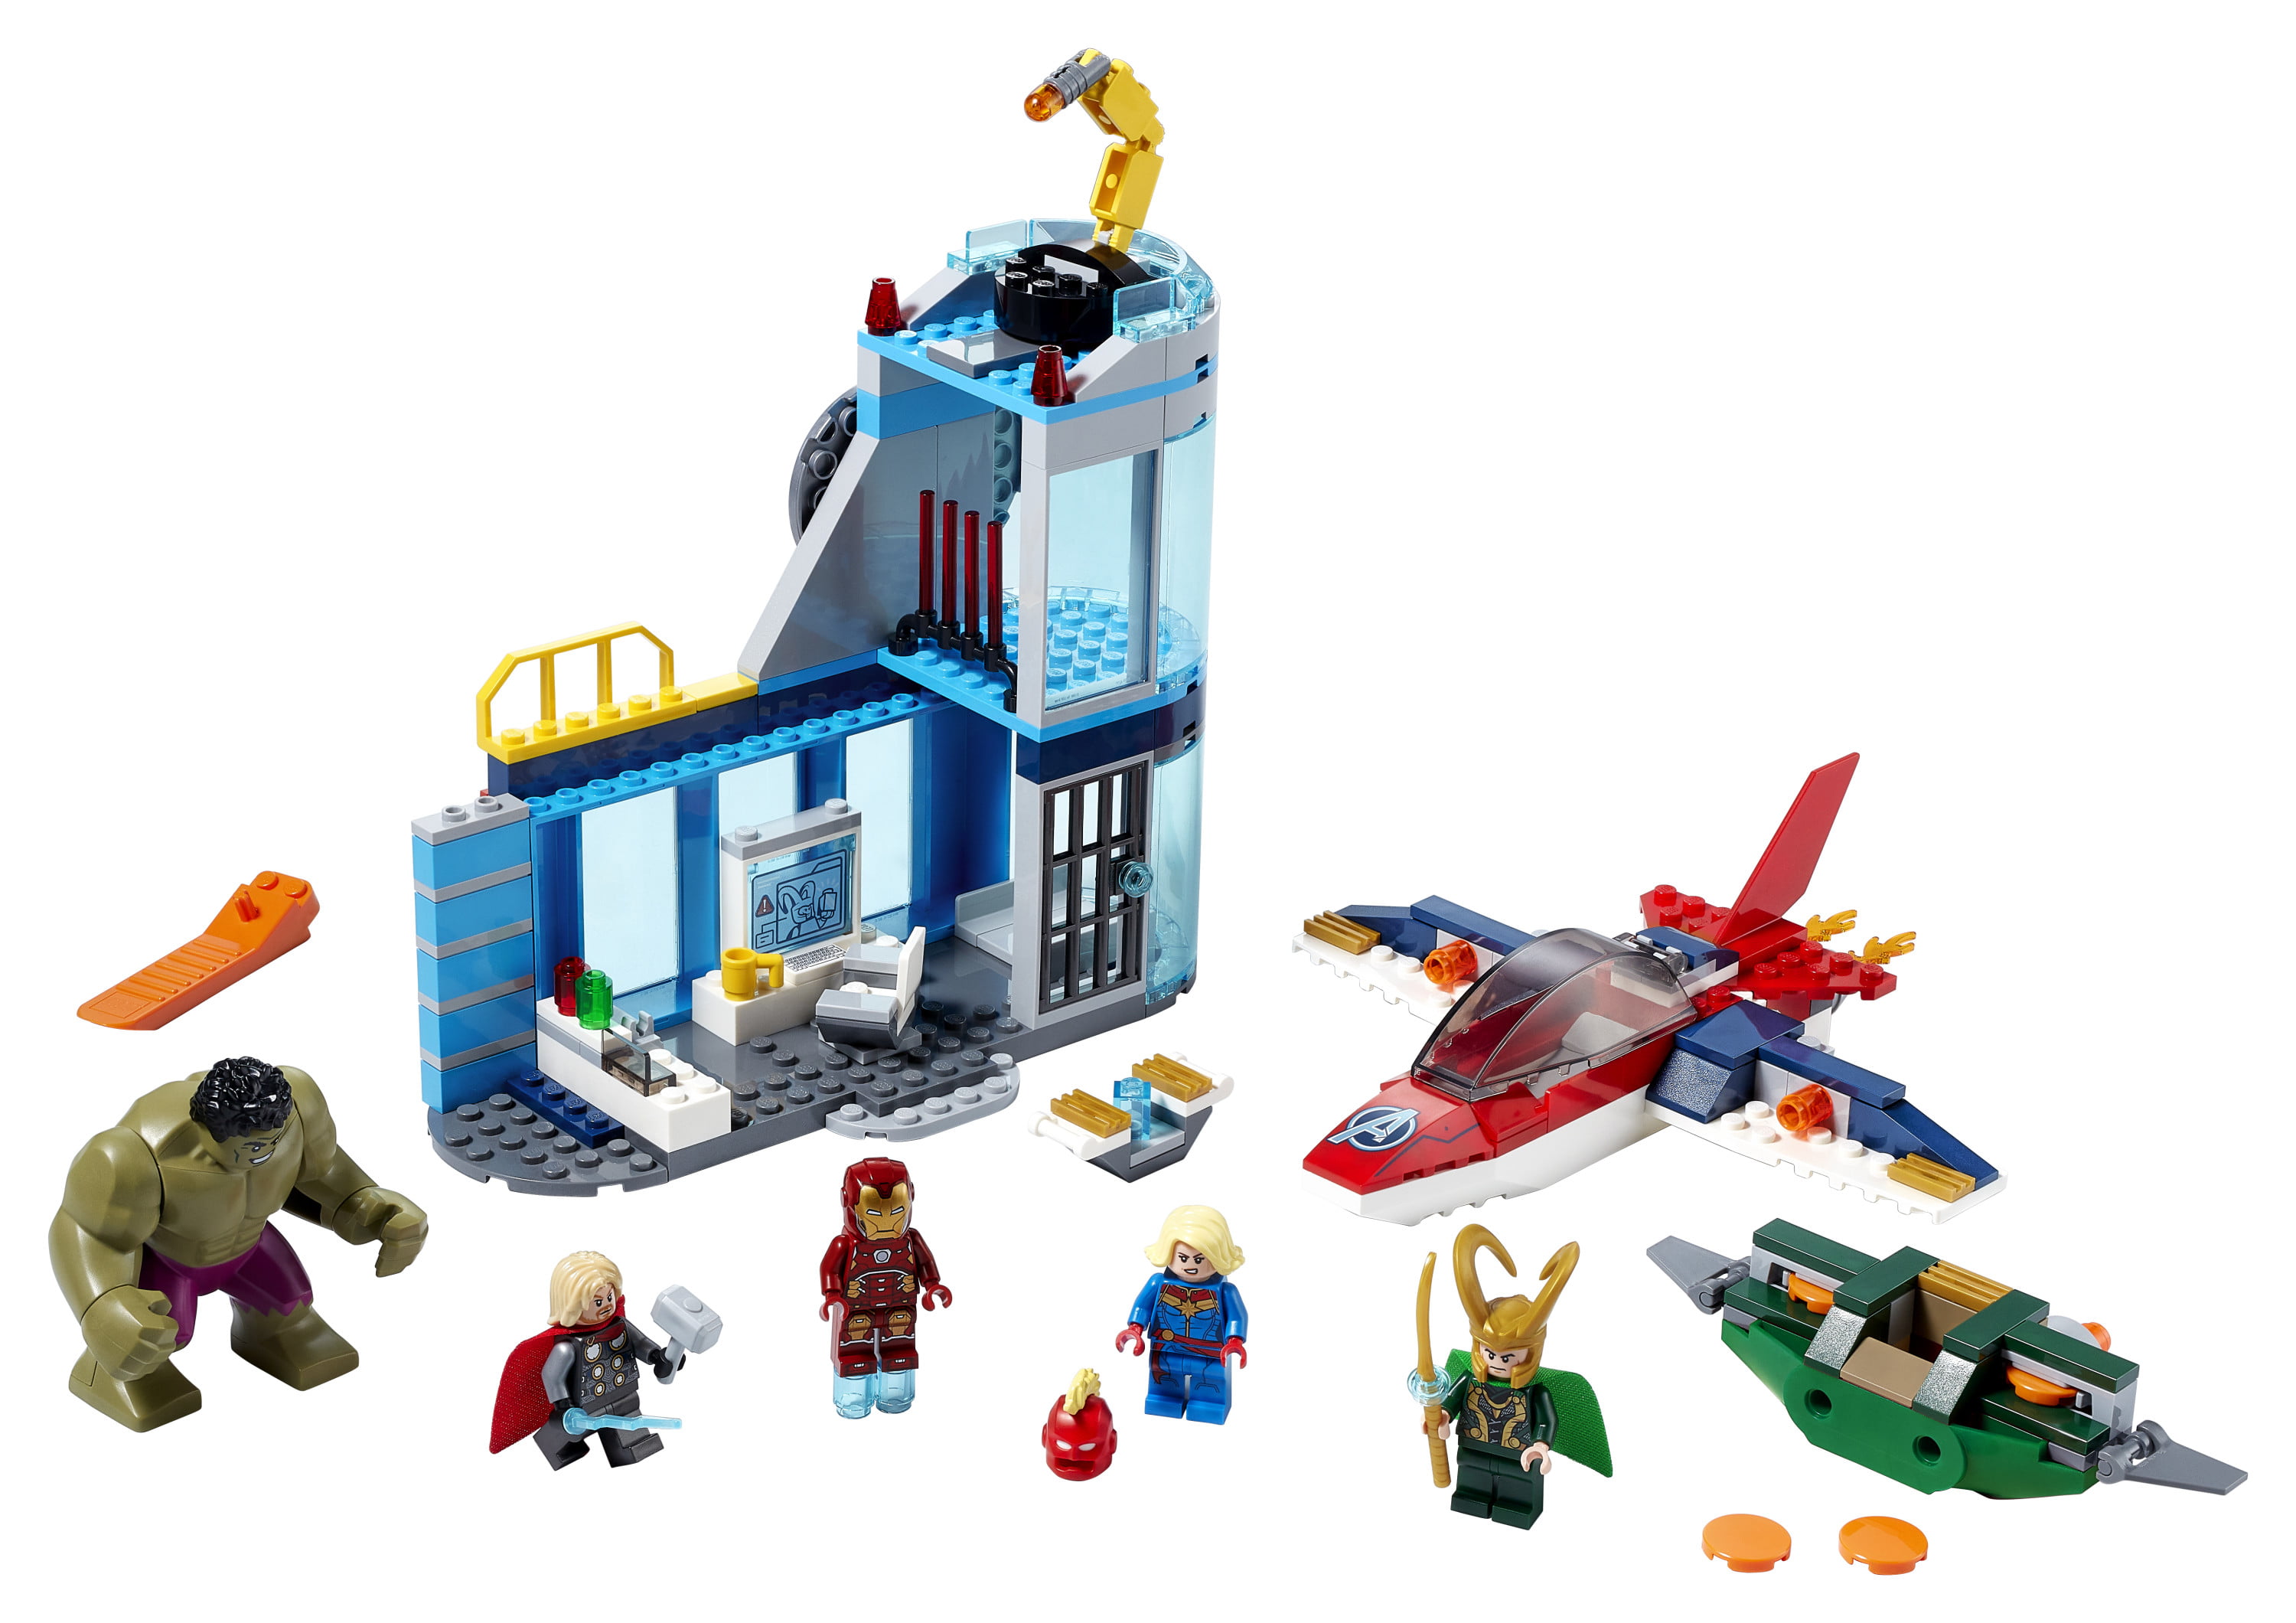 LEGO Marvel Wrath of Loki 76152 Cool Building Toy with Marvel Avengers Minifigures (223 Pieces) - Walmart.com